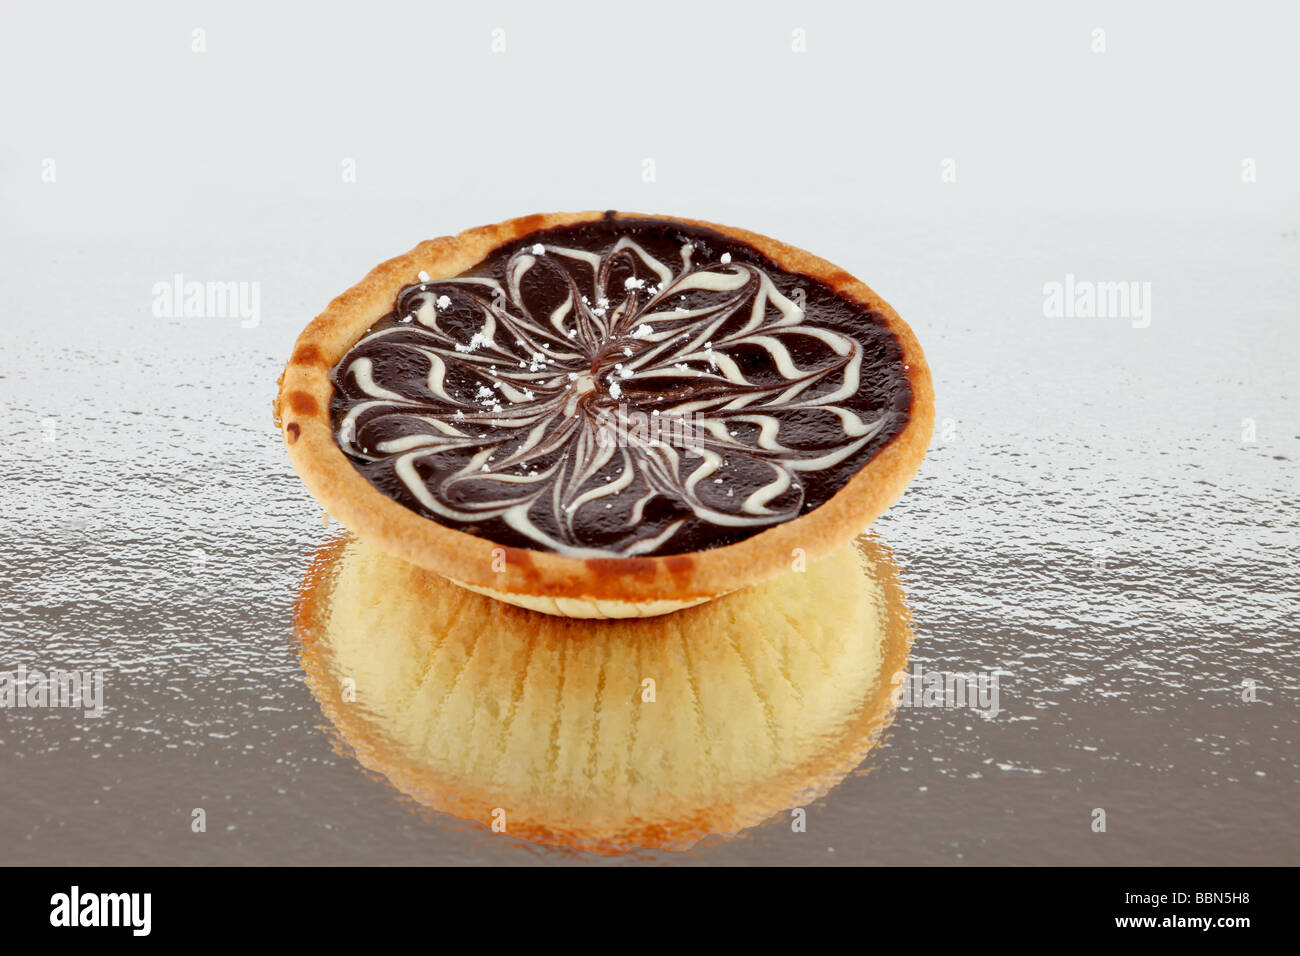 Caramel fudge tart with chocolate decorated top on a reflective surface Stock Photo